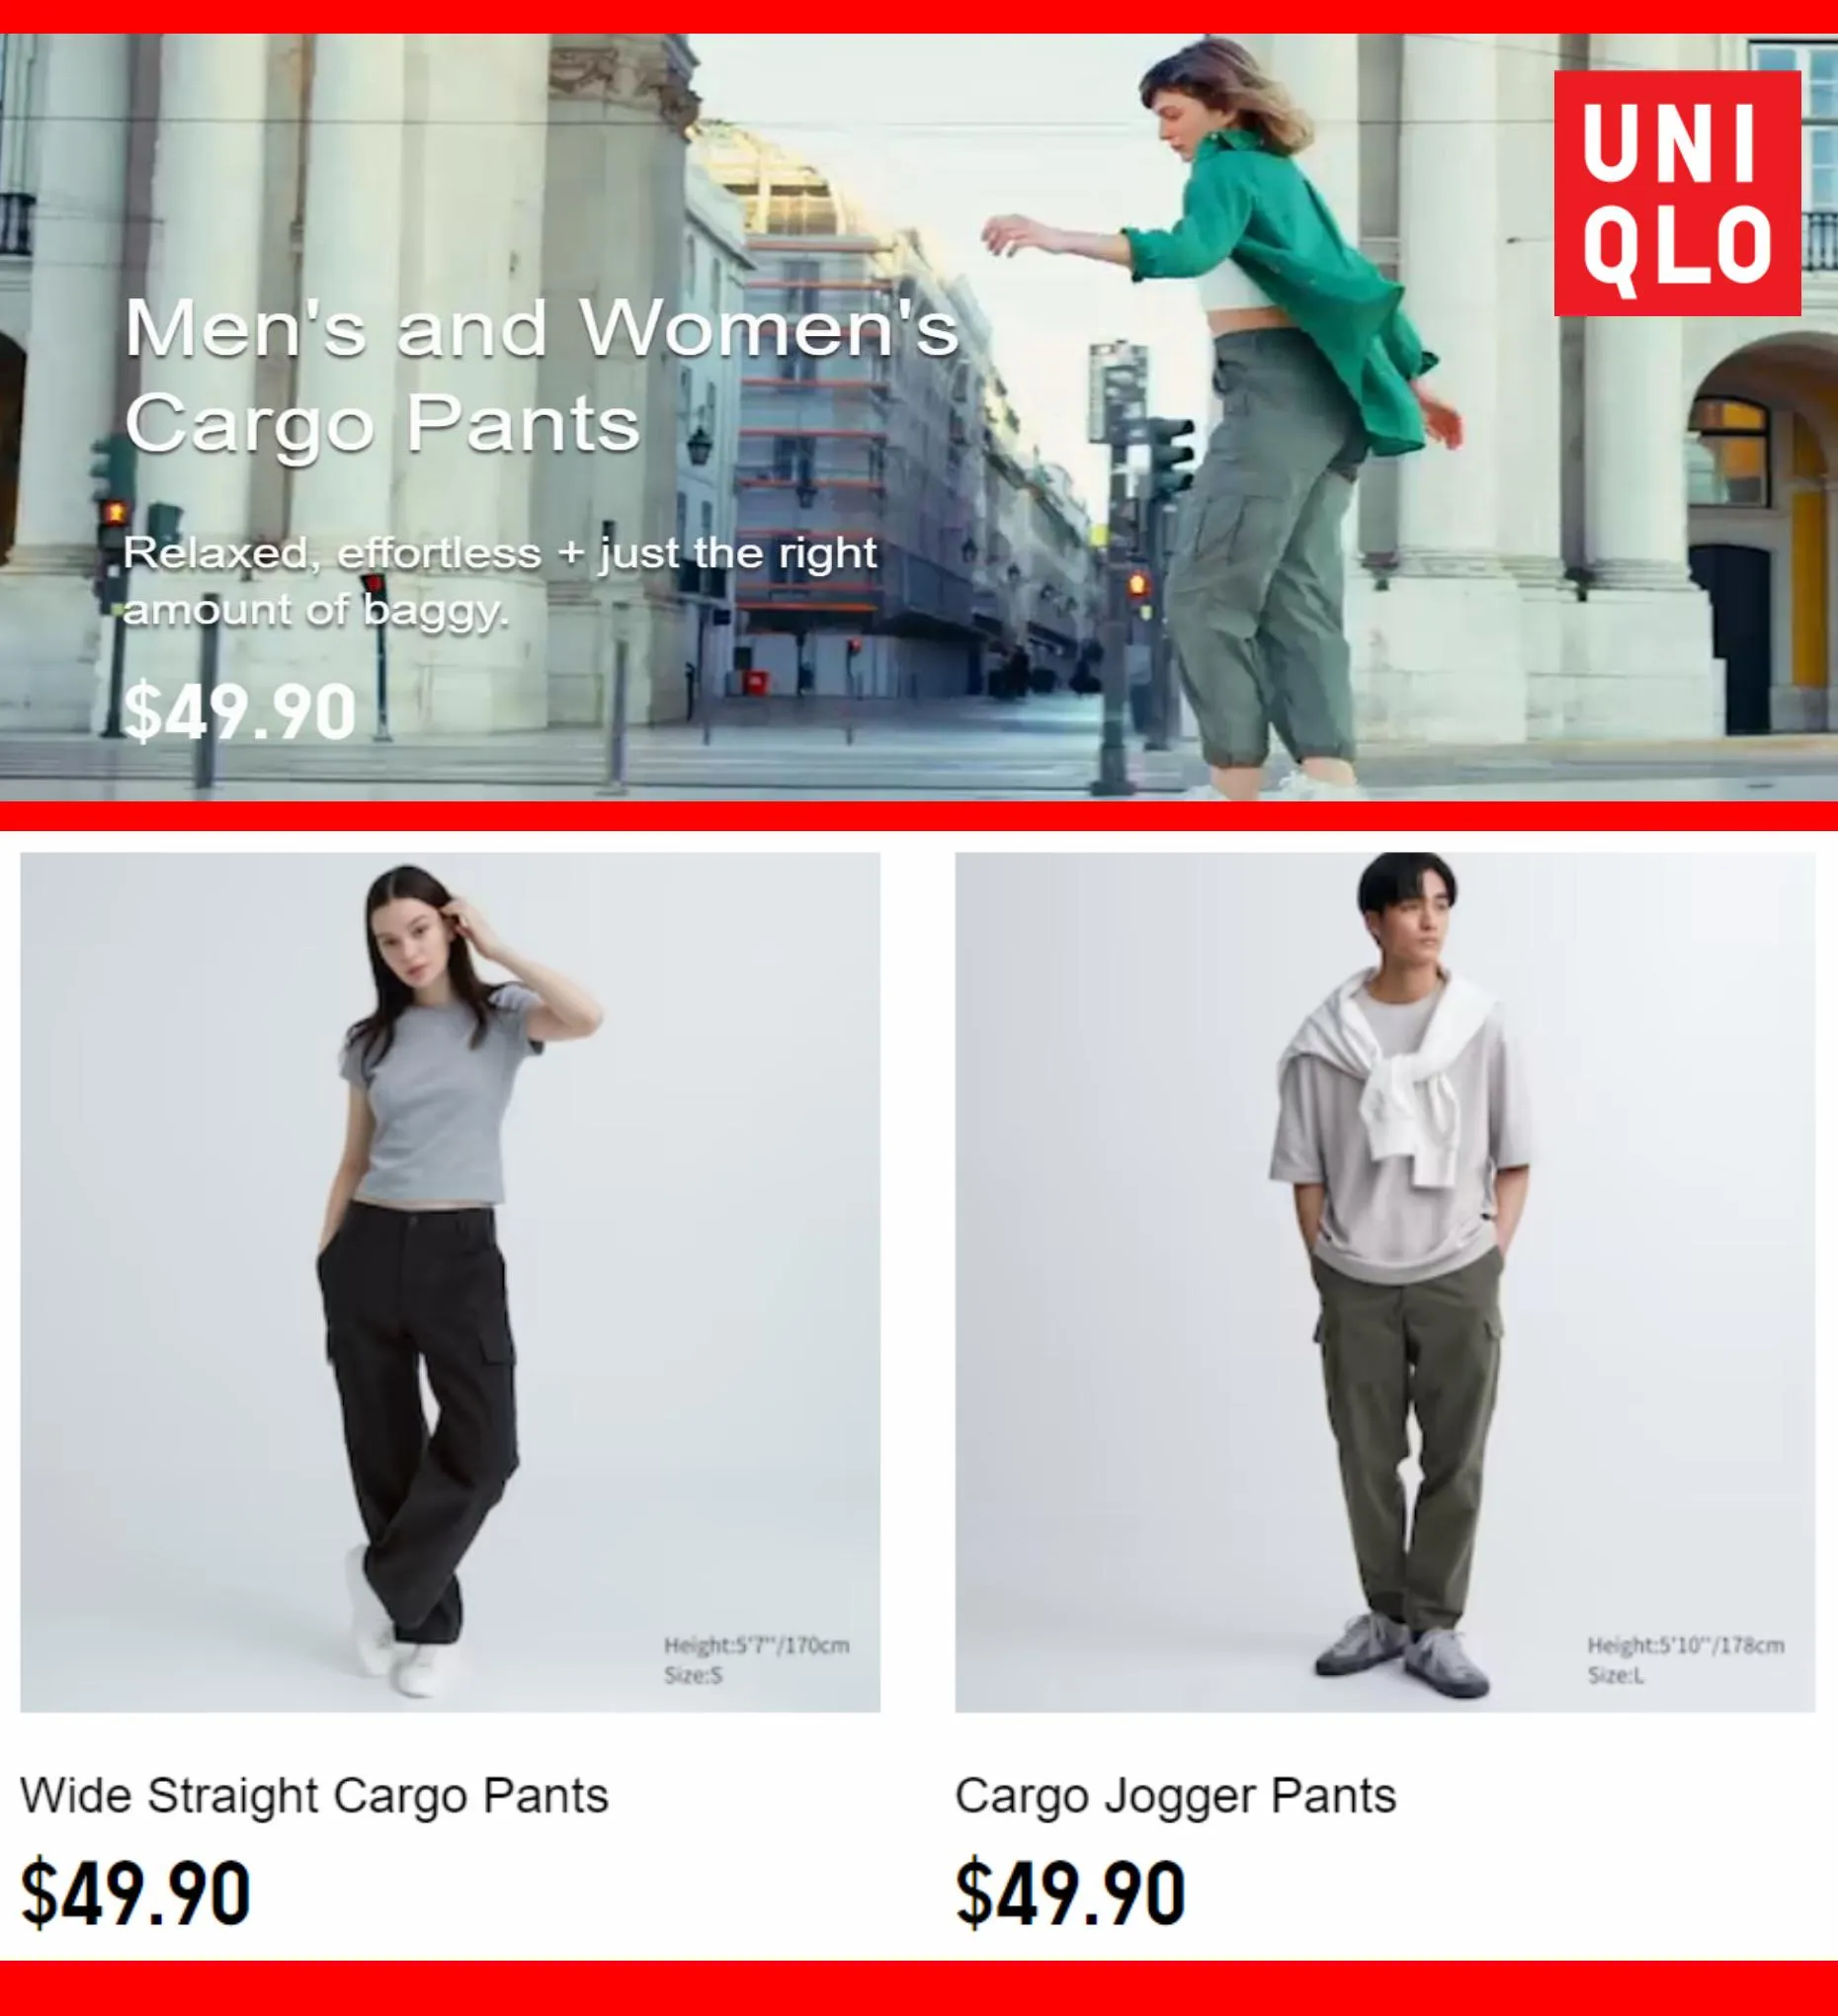 Catalogue Men's and Women's Cargo Pants $49.90, page 00003